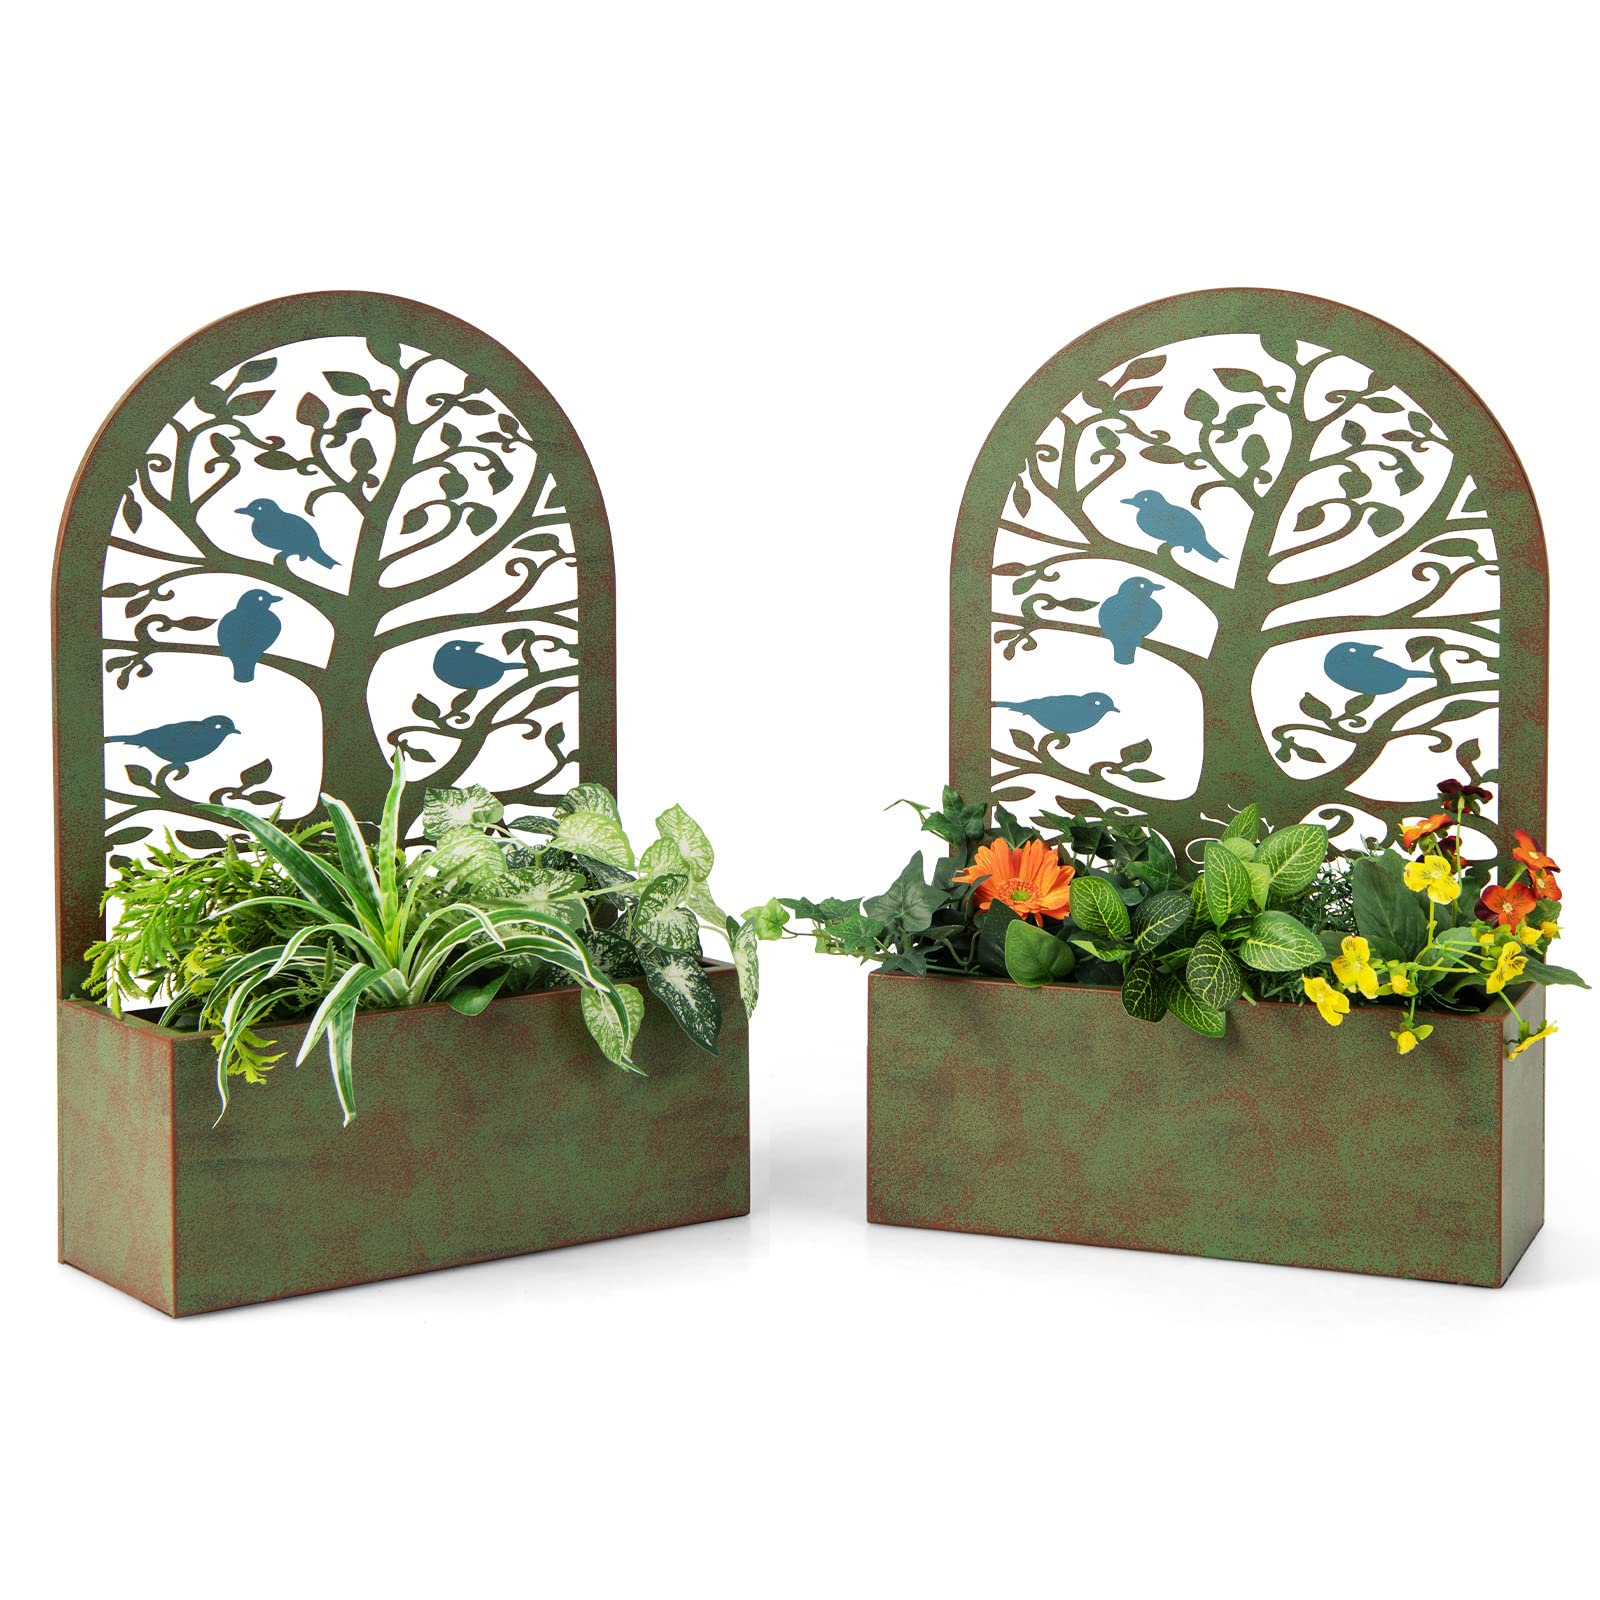 Giantex Raised Garden Bed Set of 2 - Wall-Mounted & Freestanding Decorative Planter Boxes with Trellises